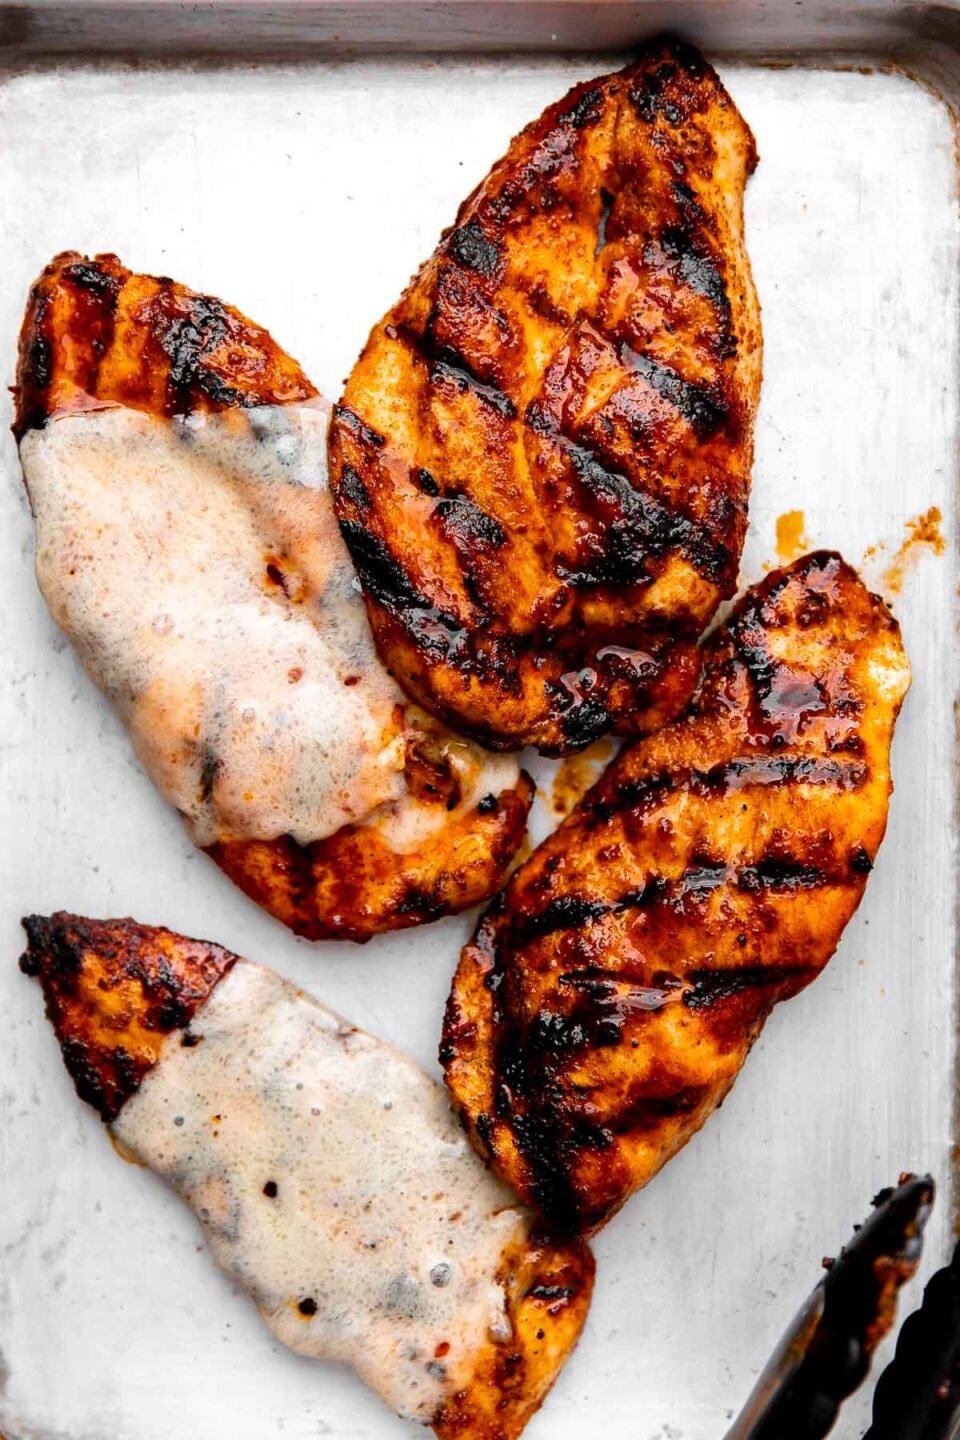 Four grilled buffalo chicken breasts arranged atop an aluminum baking sheet. Two of the chicken breasts are shown with melted cheese overtop. A pair of grilling tongs rests on the side of the baking sheet.